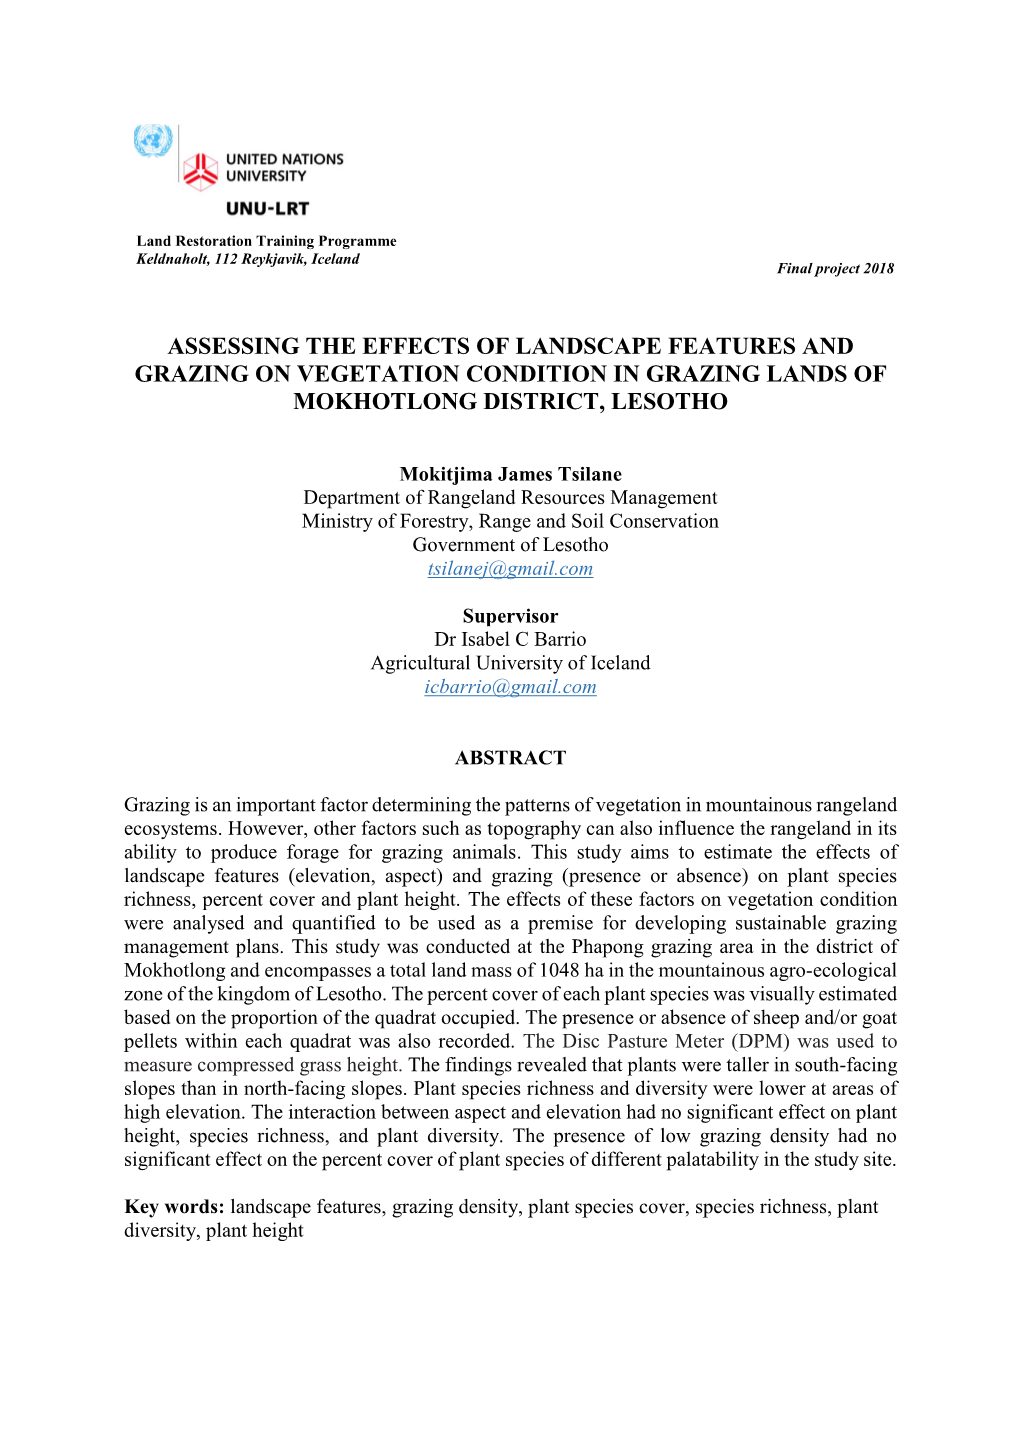 Assessing the Effects of Landscape Features and Grazing on Vegetation Condition in Grazing Lands of Mokhotlong District, Lesotho